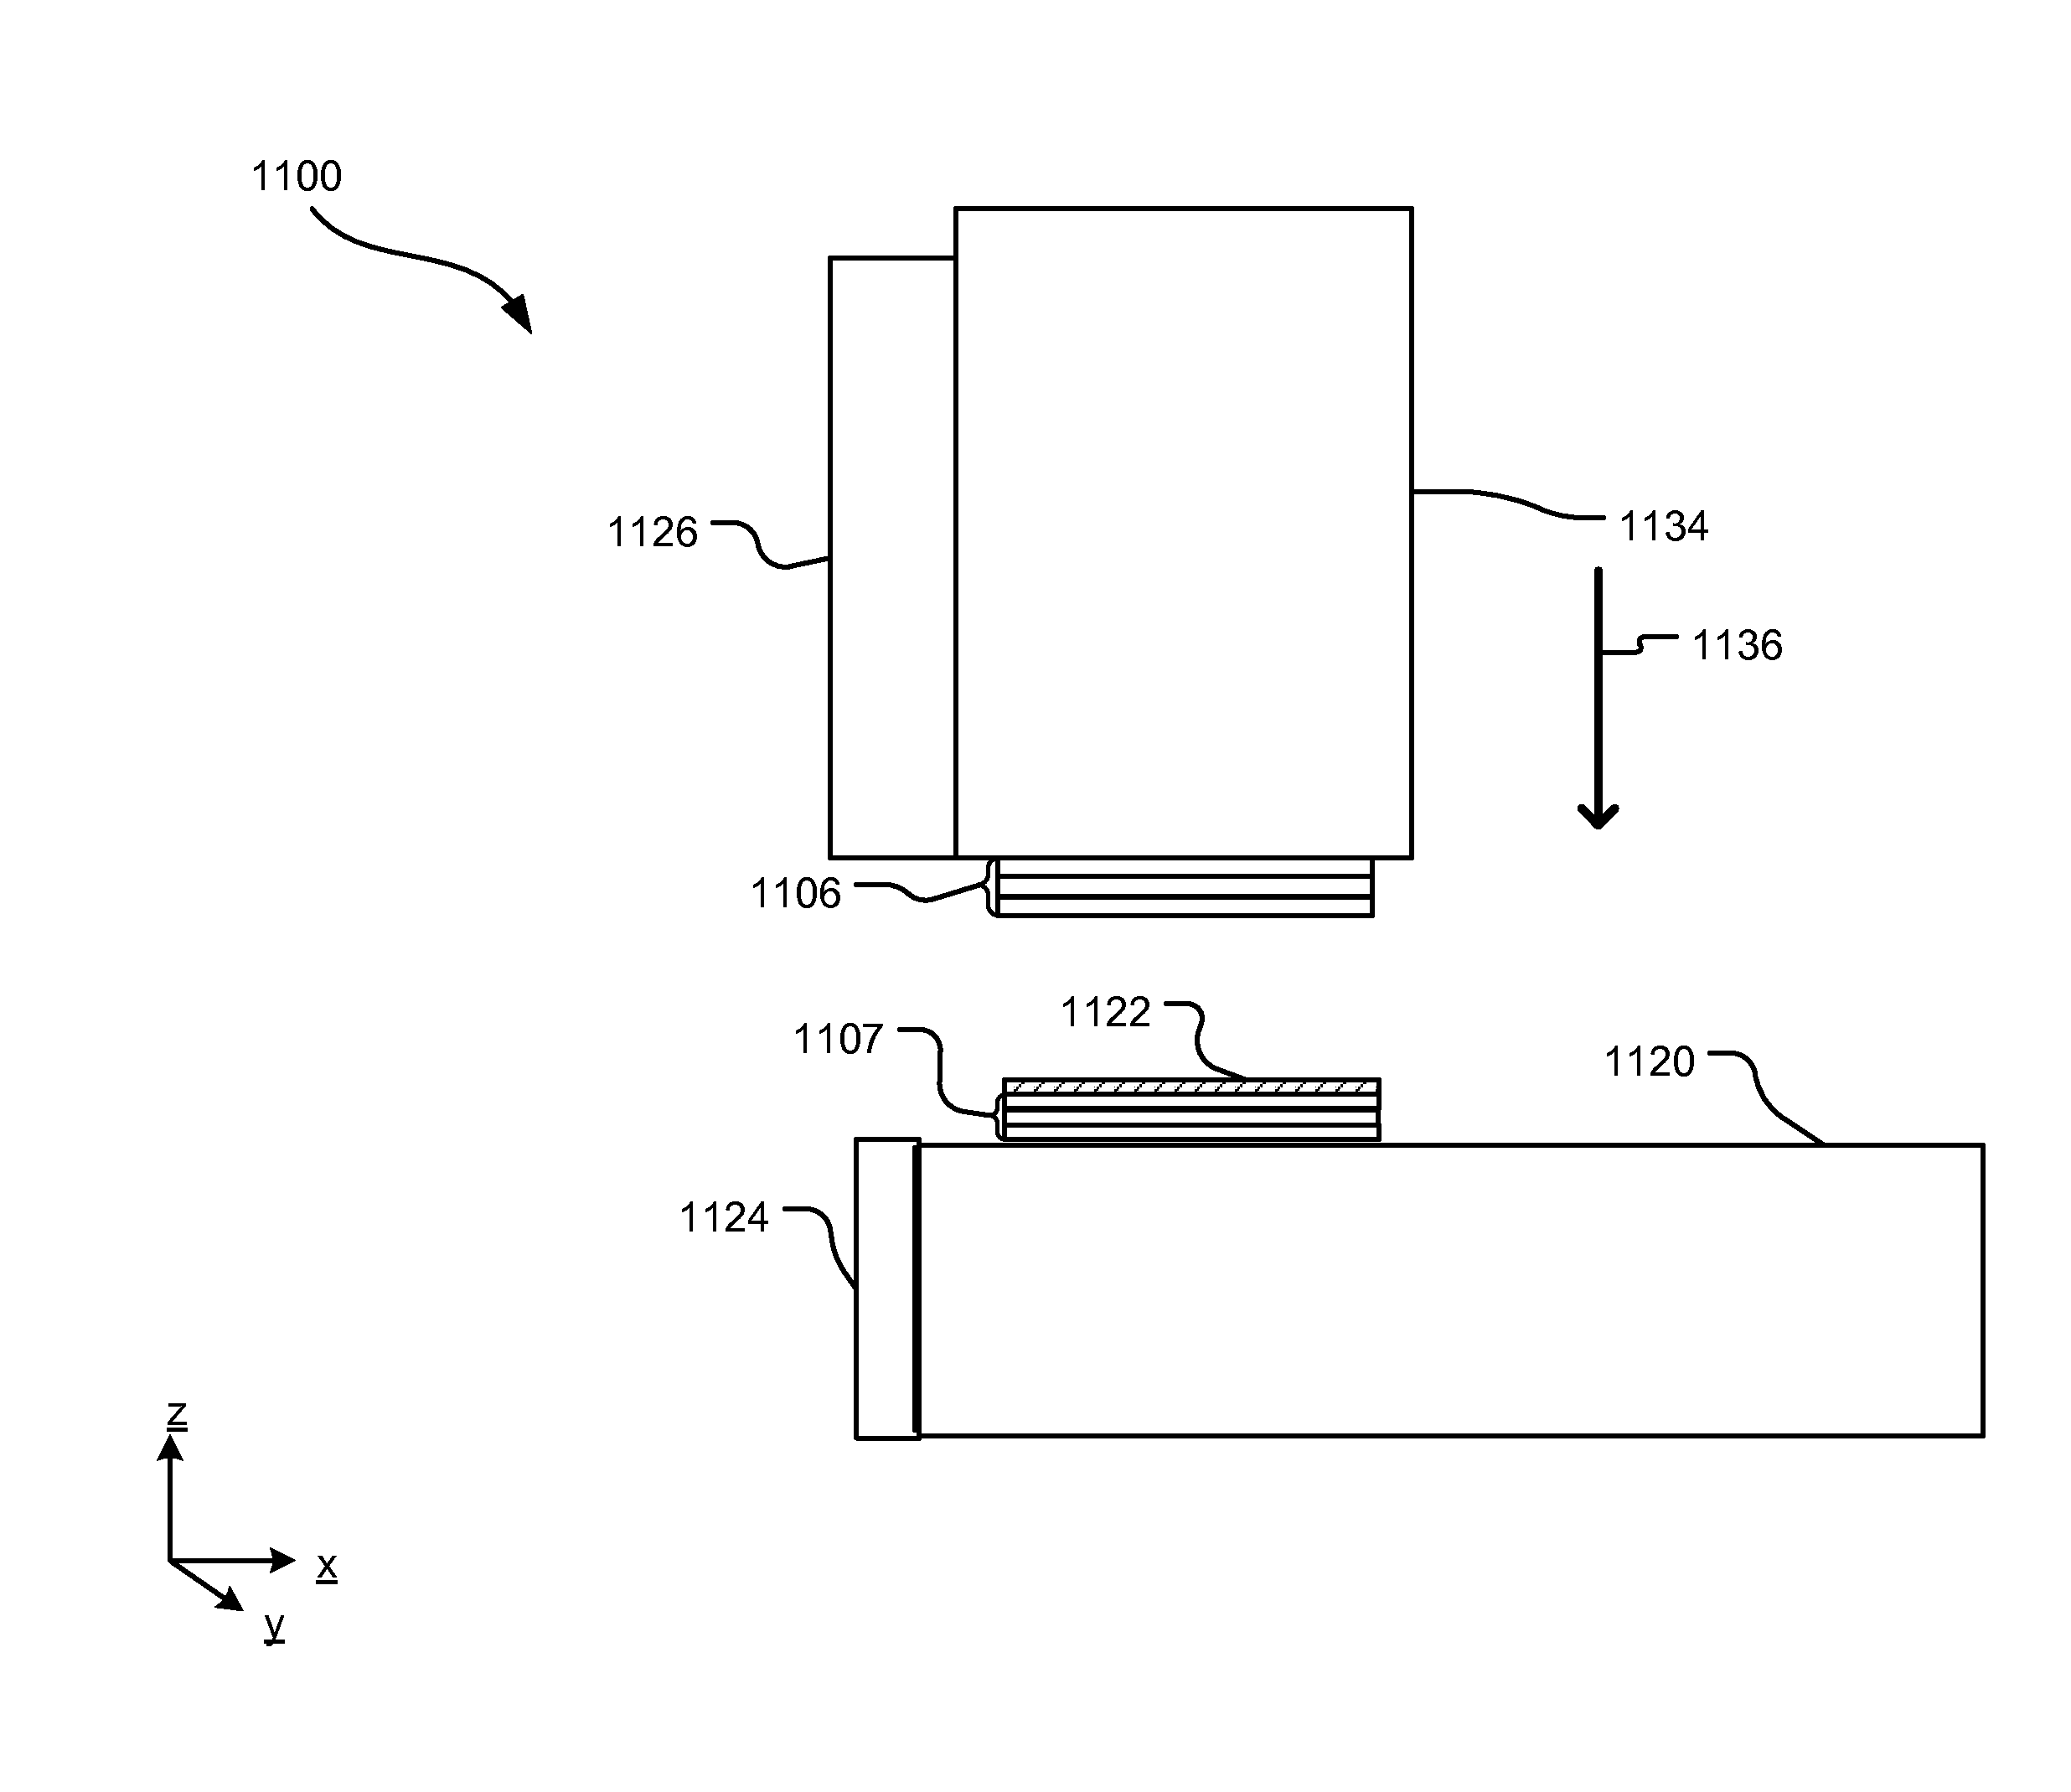 Solderable pad fabrication for microelectronic components